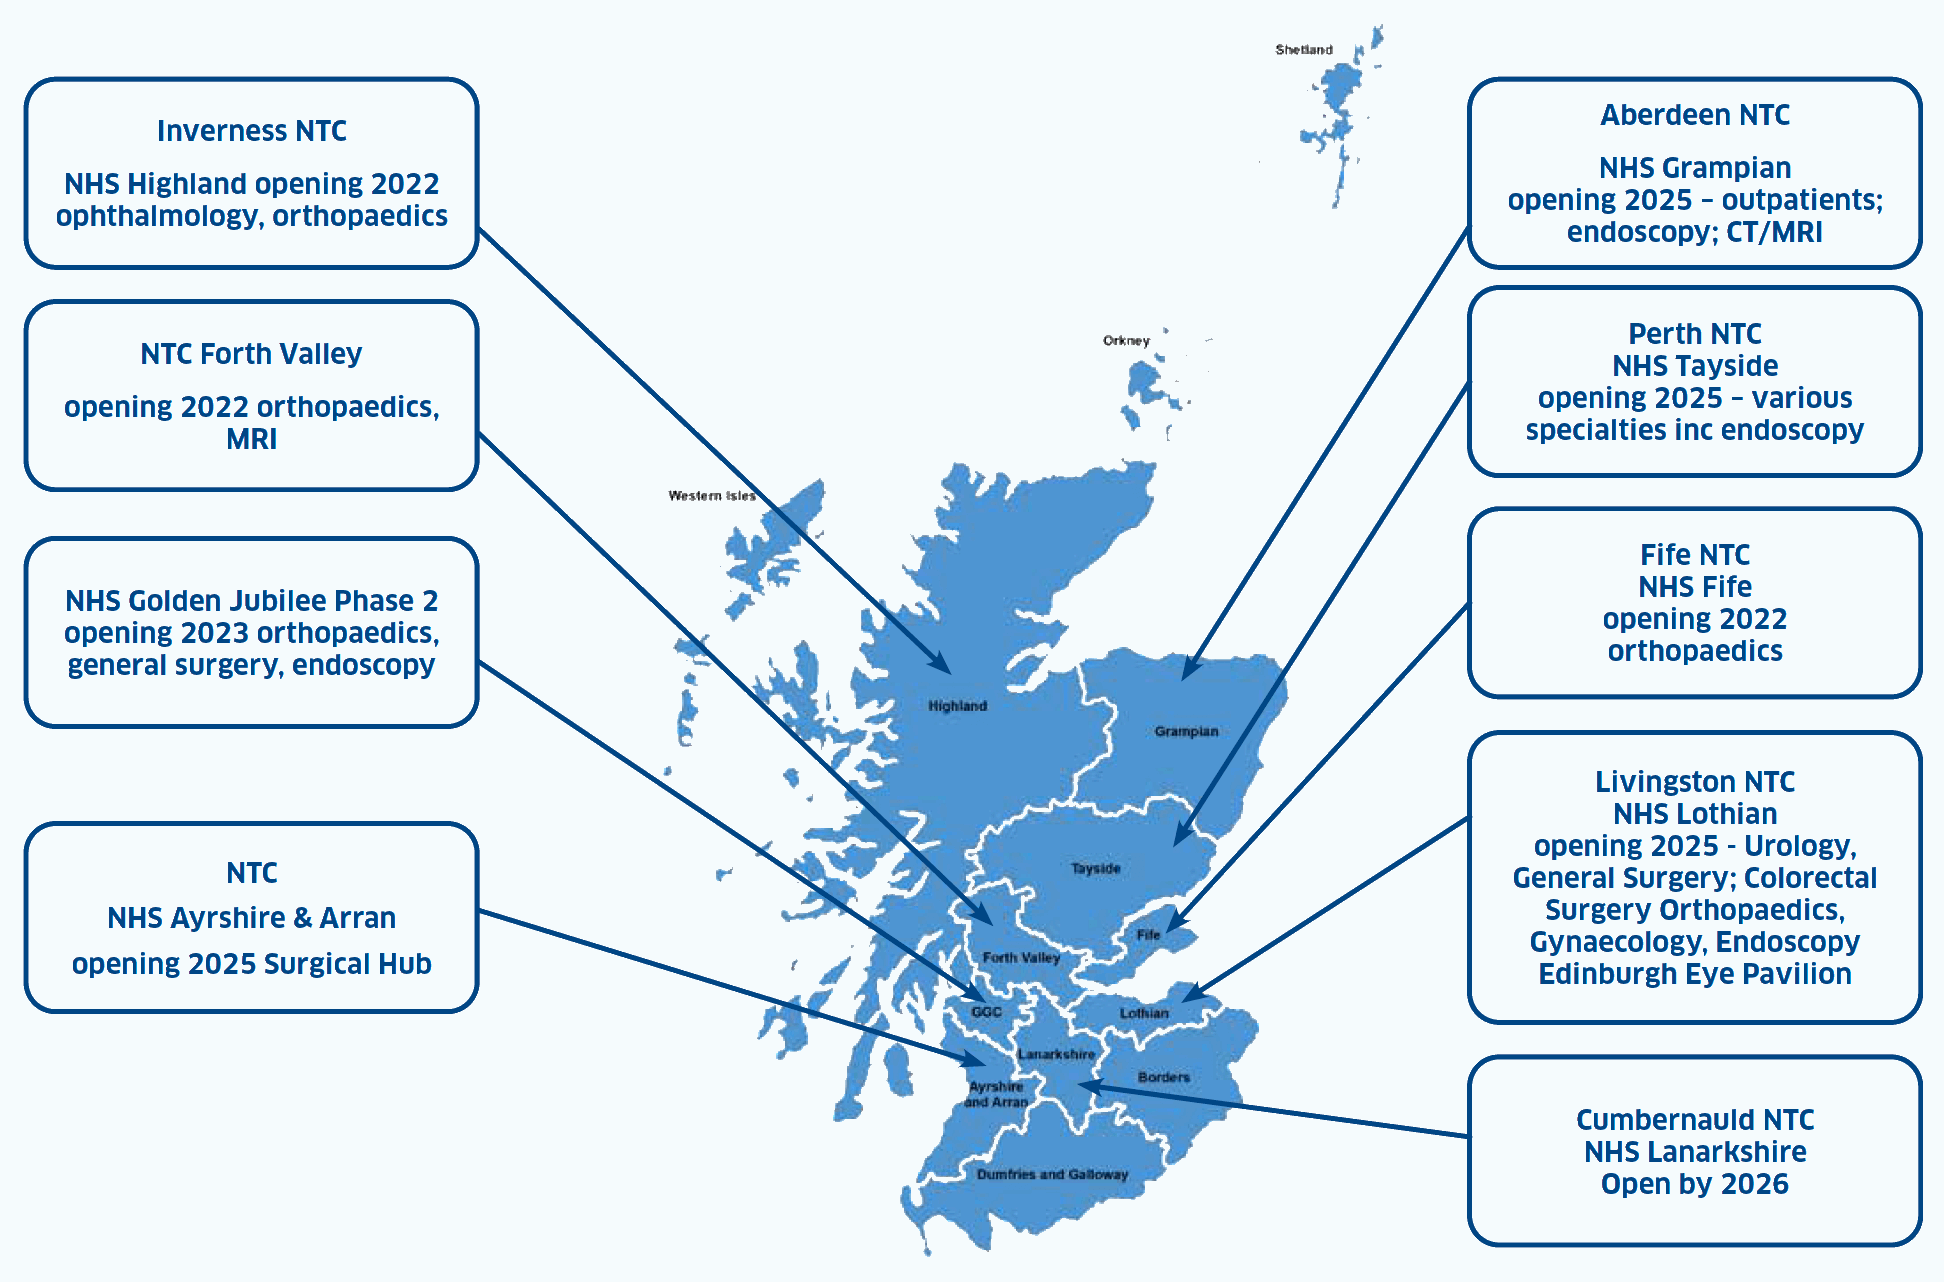 The map shows where each of the National Treatment Centres will be located across Scotland. There are 9 in total: NHS Ayrshire & Arran – opens 2025, NHS Fife – opens in 2022, NHS Forth Valley – opens in 2022, NHS Grampian – opens 2025, Golden, Jubilee National Hospital – phase 1 opened November 2020 and phase two to opens 2023, NHS Highland – opens 2022, NHS Lanarkshire – opens 2026, NHS Lothian – opens 2025 and NHS Tayside which opens 2025.